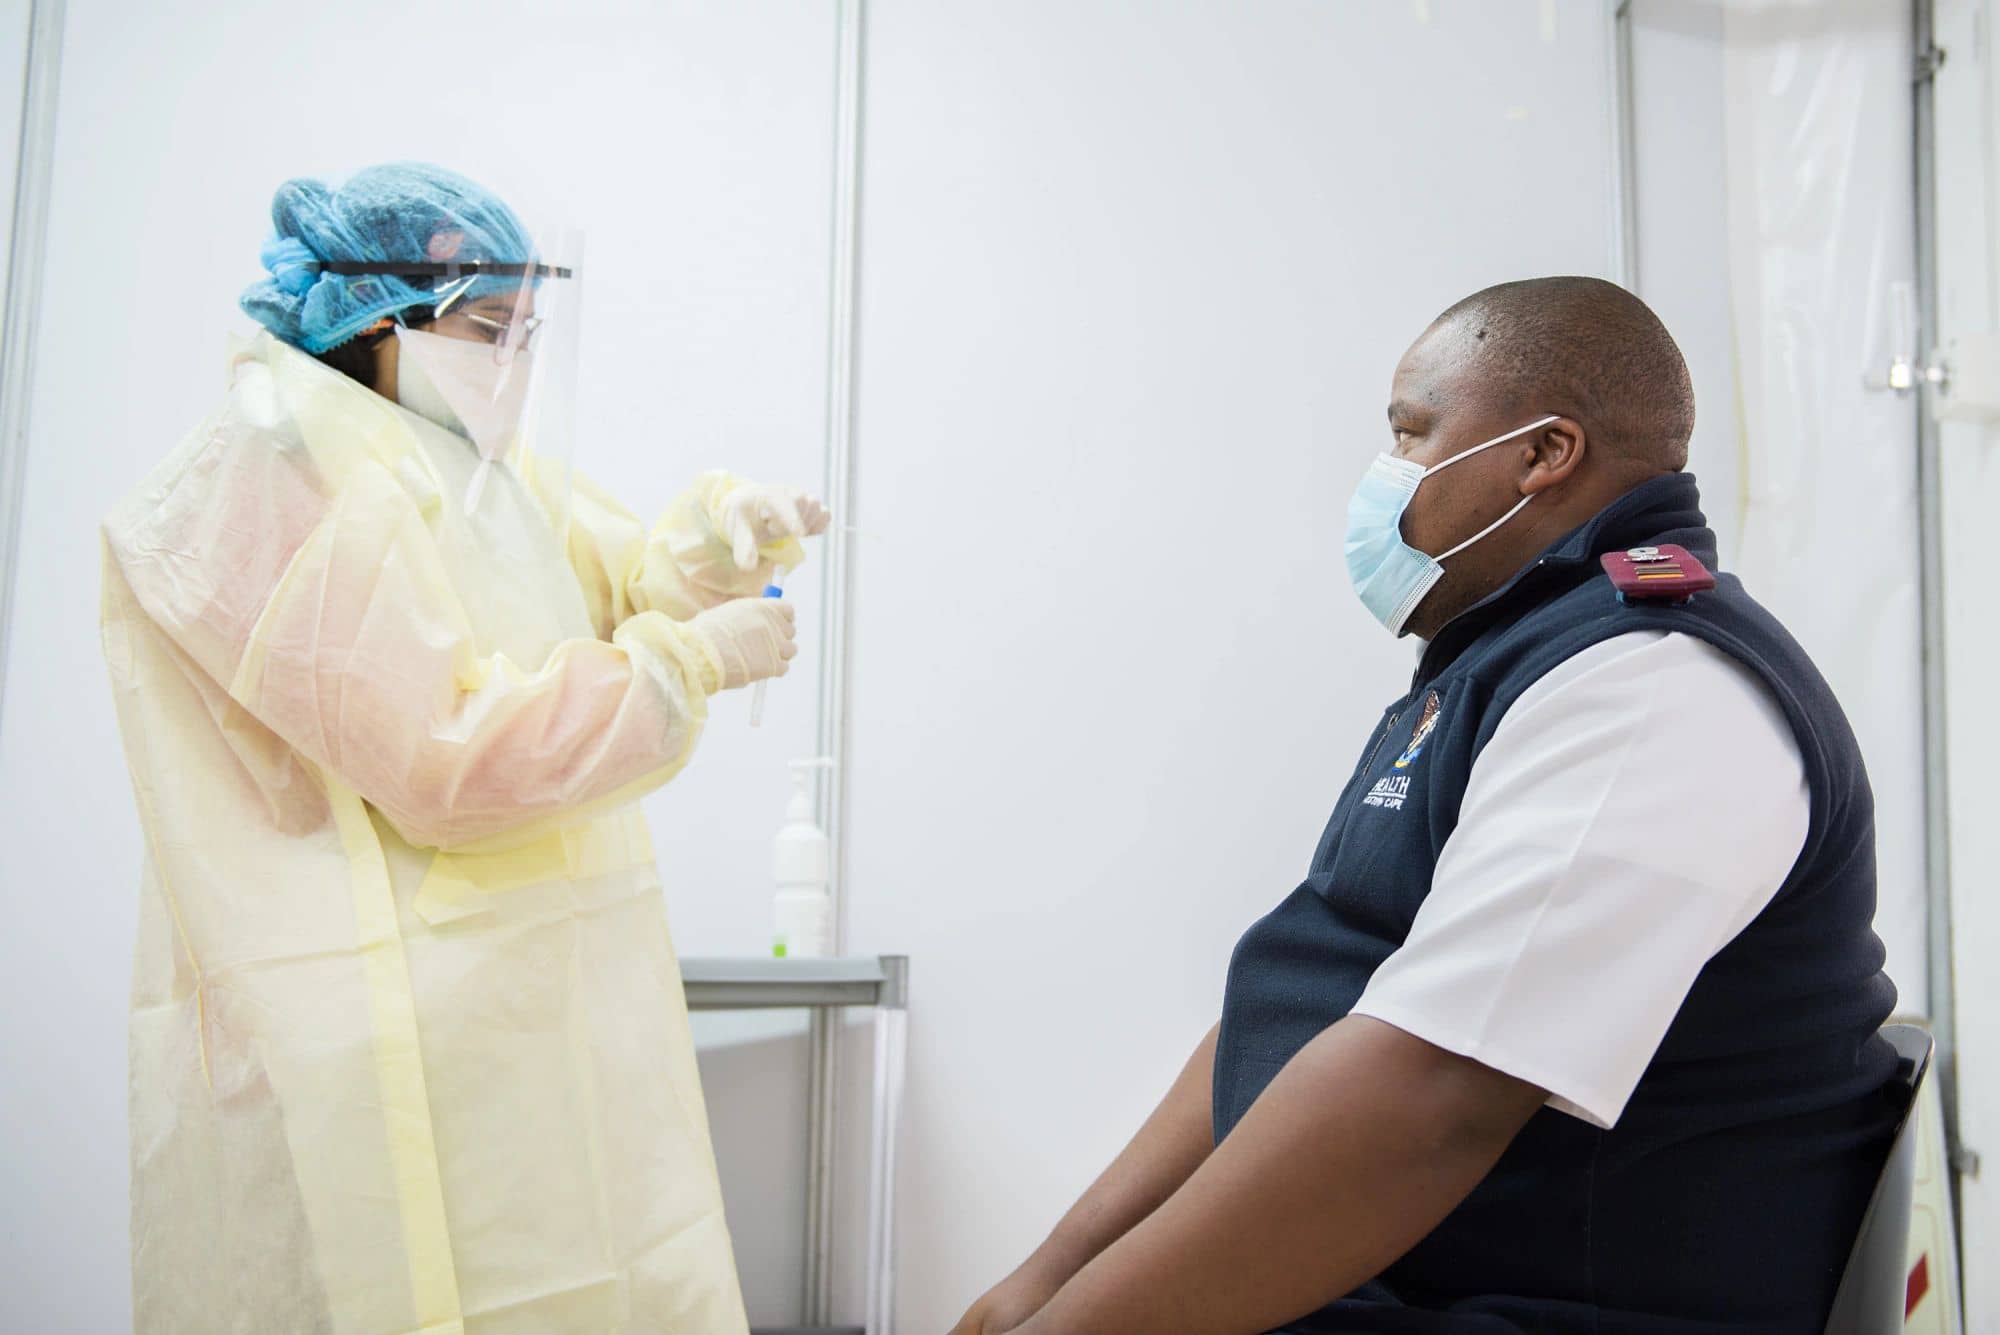 Healthcare worker conducts COVID-19 test in South Africa